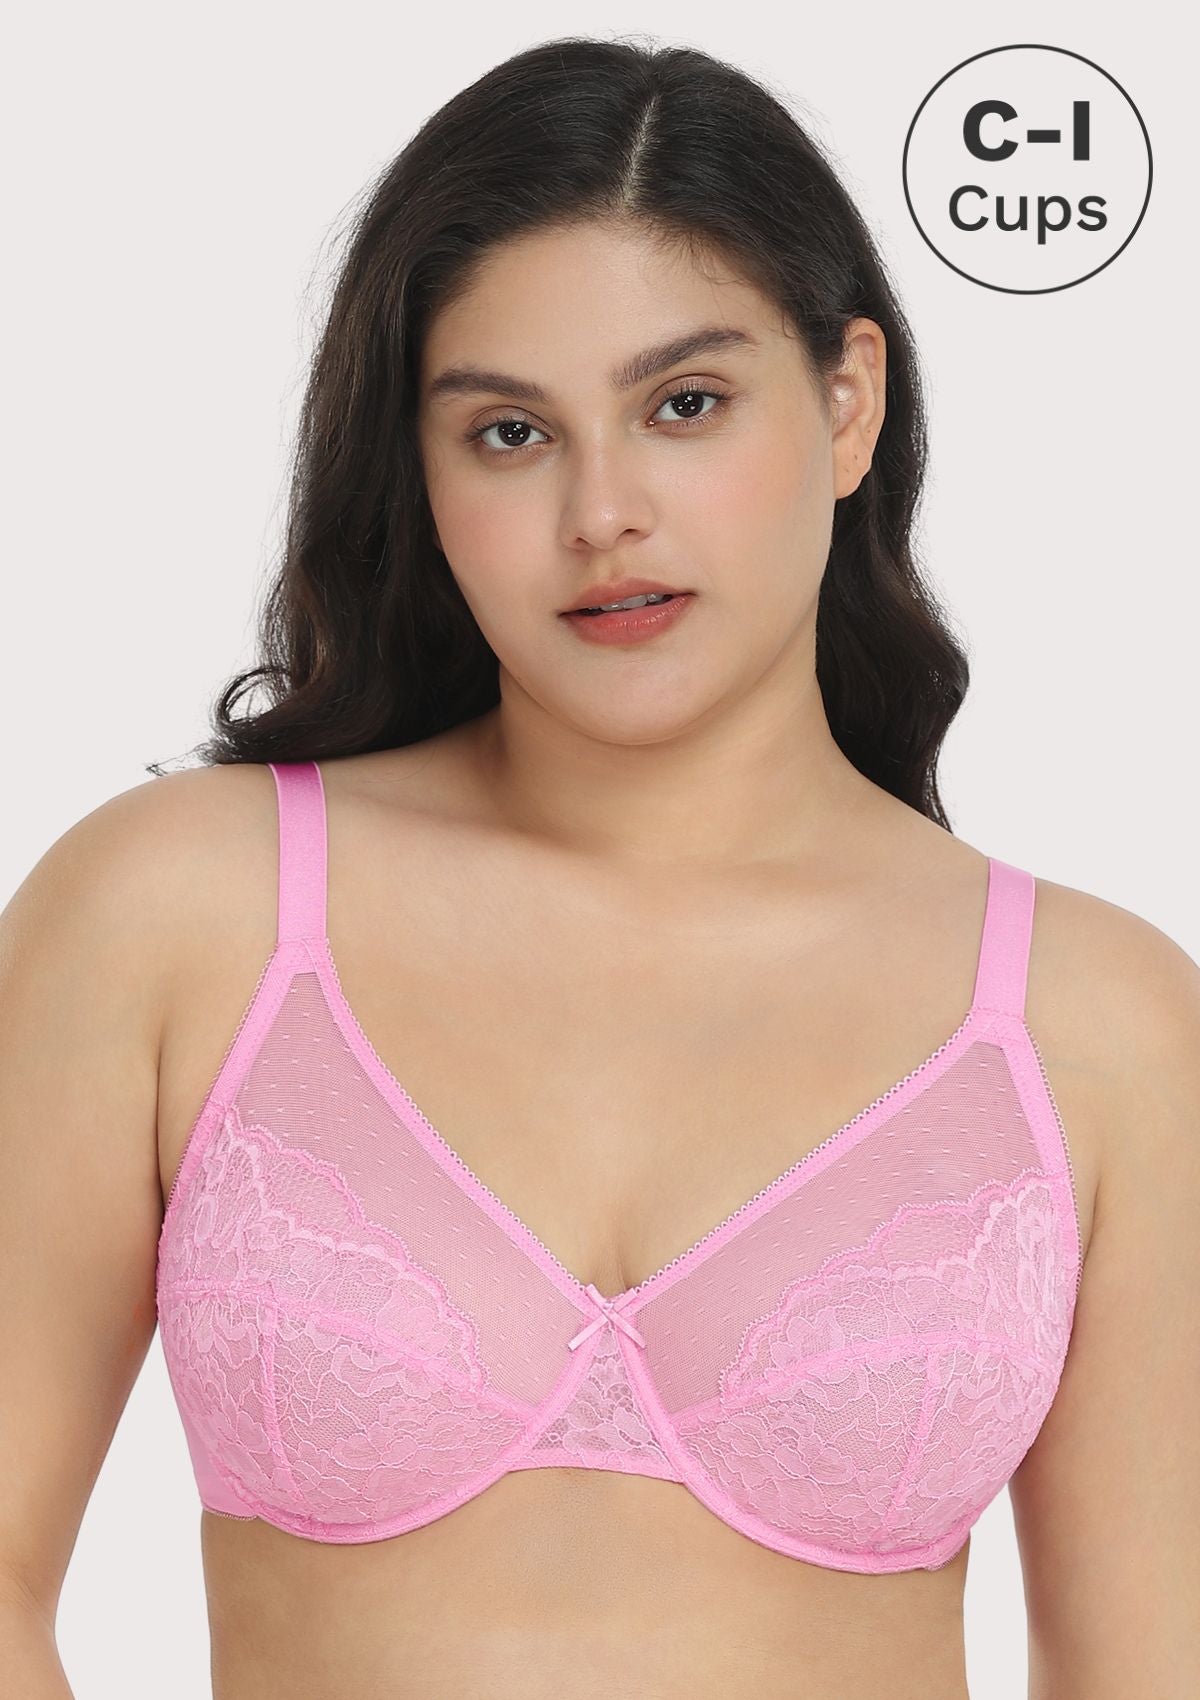 HSIA Enchante Lacy Bra: Comfy Sheer Lace Bra With Lift - Dusty Peach / 42 / H